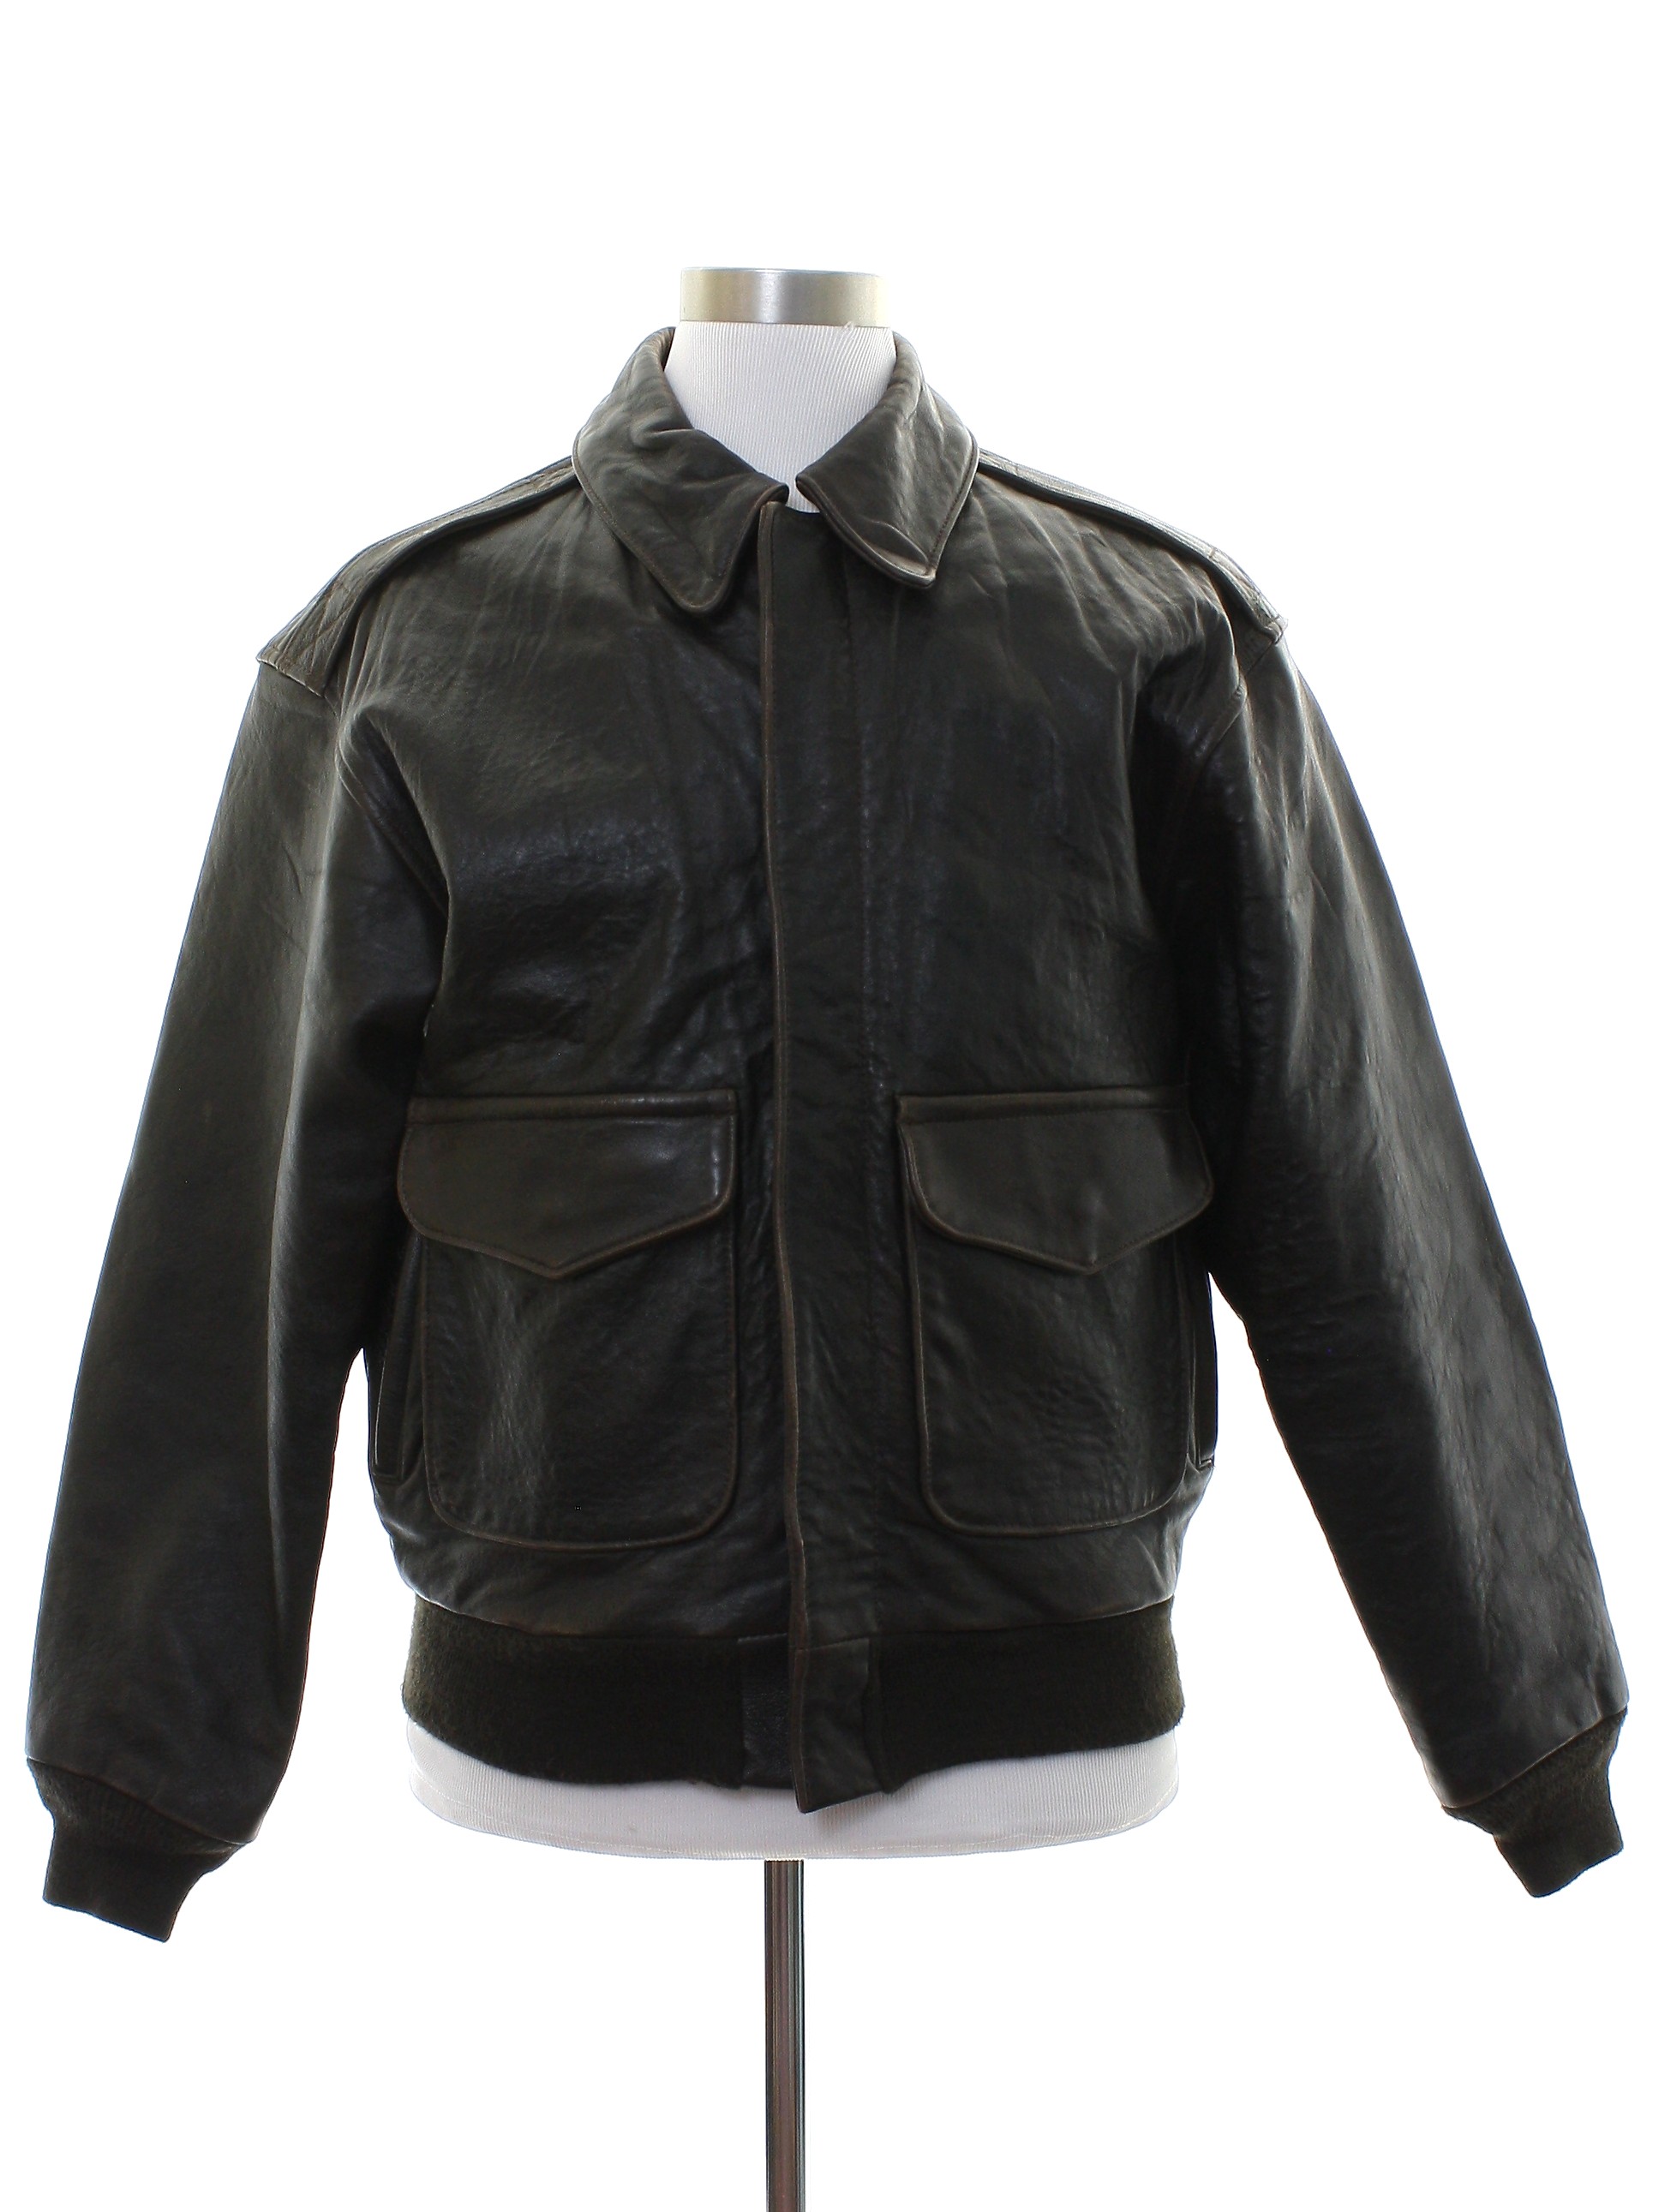 1970s Avirex Made in USA Leather Jacket: Late 70s or Early 80s -Avirex ...